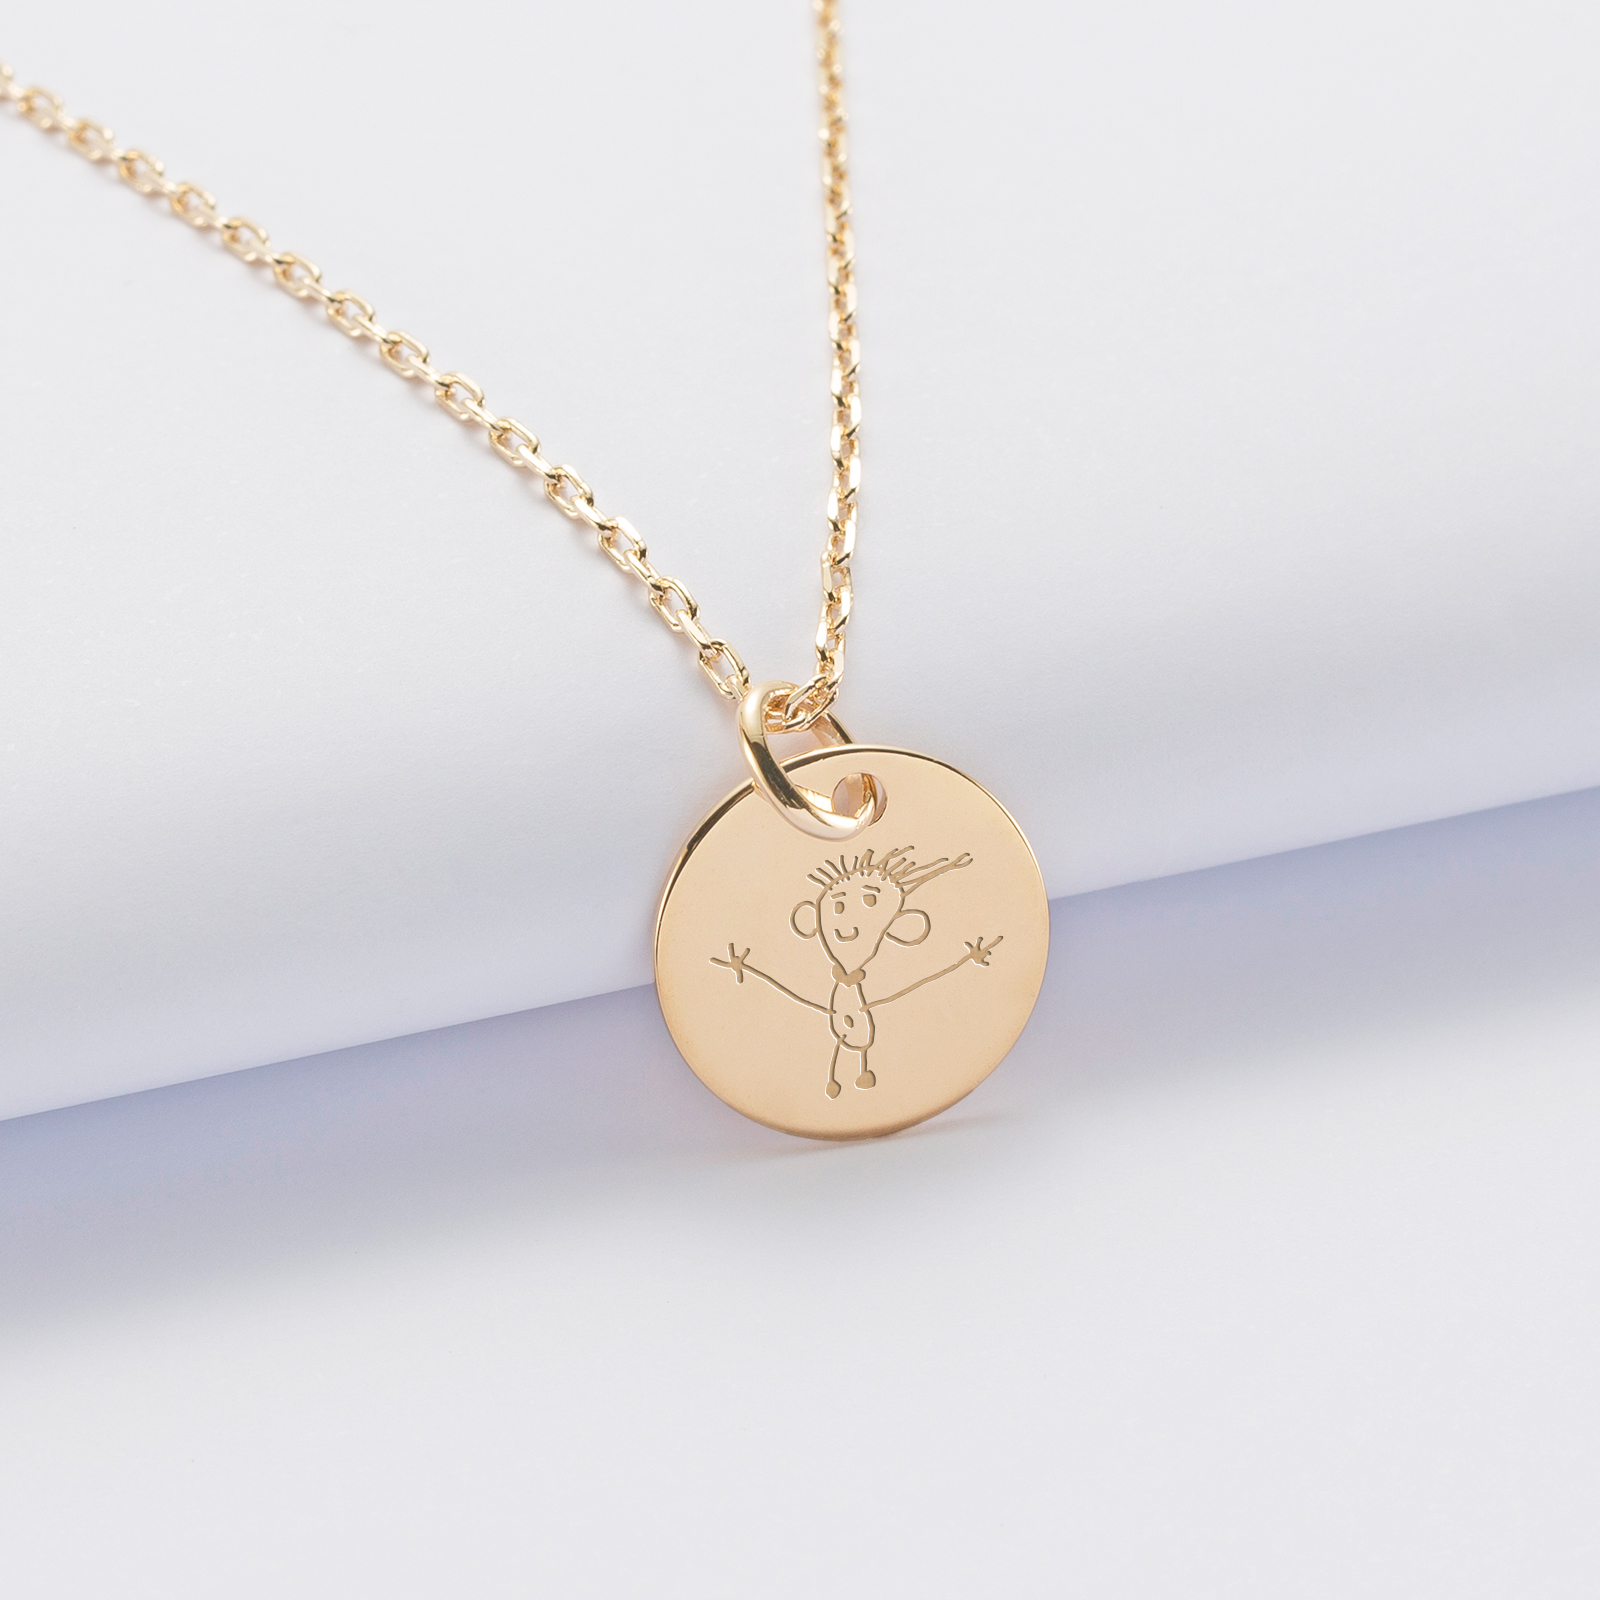 Personalised engraved gold plated medallion pendant 15 mm sketch